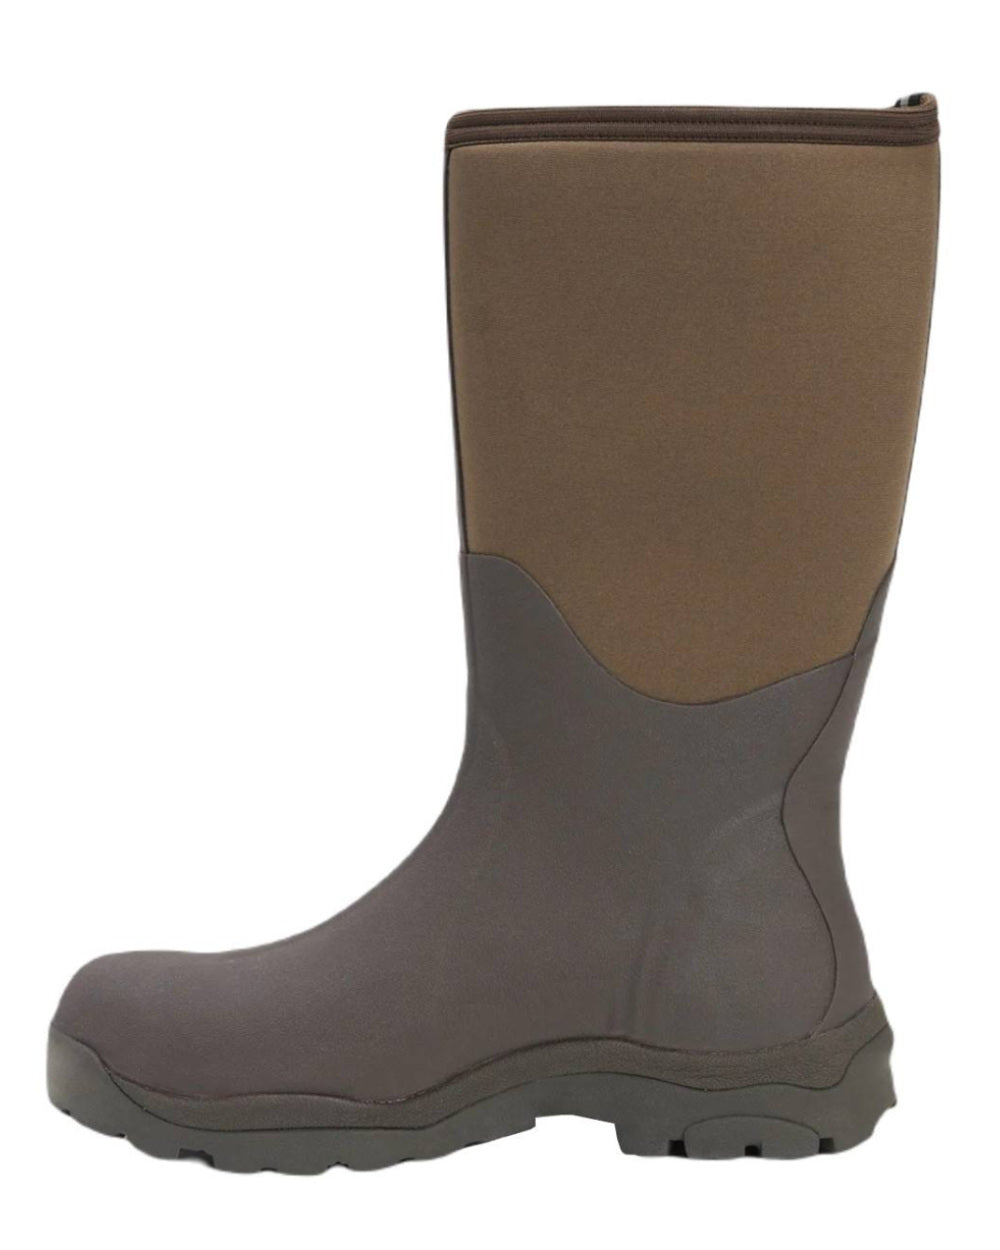 Bark Coloured Muck Boots Womens Wetland Tall Wellingtons On A White Background 